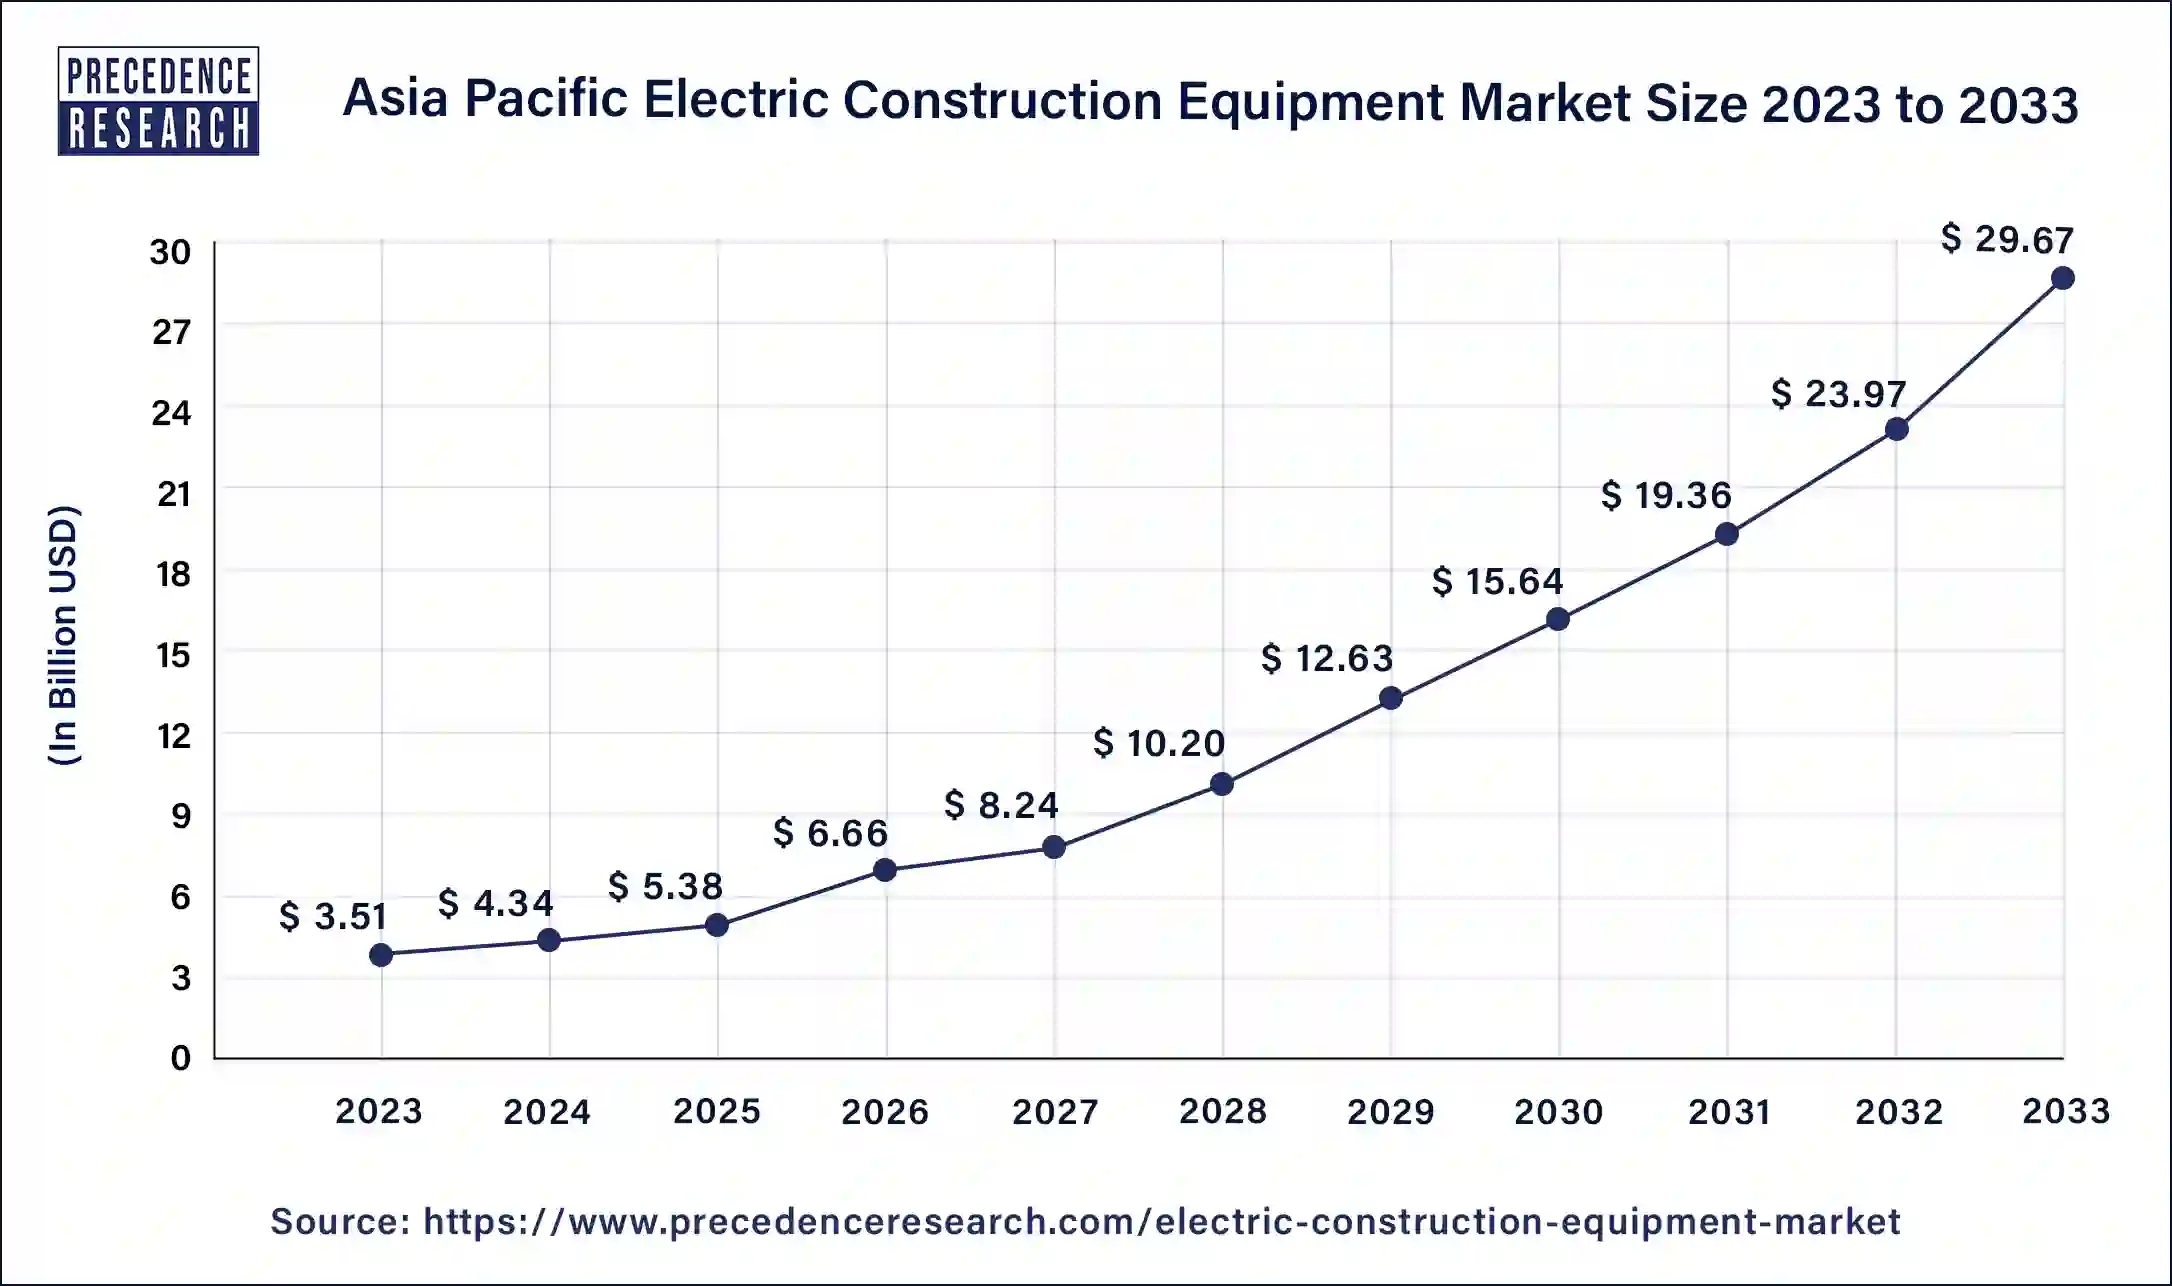 Asia Pacific Electric Construction Equipment Market Size 2024 to 2033